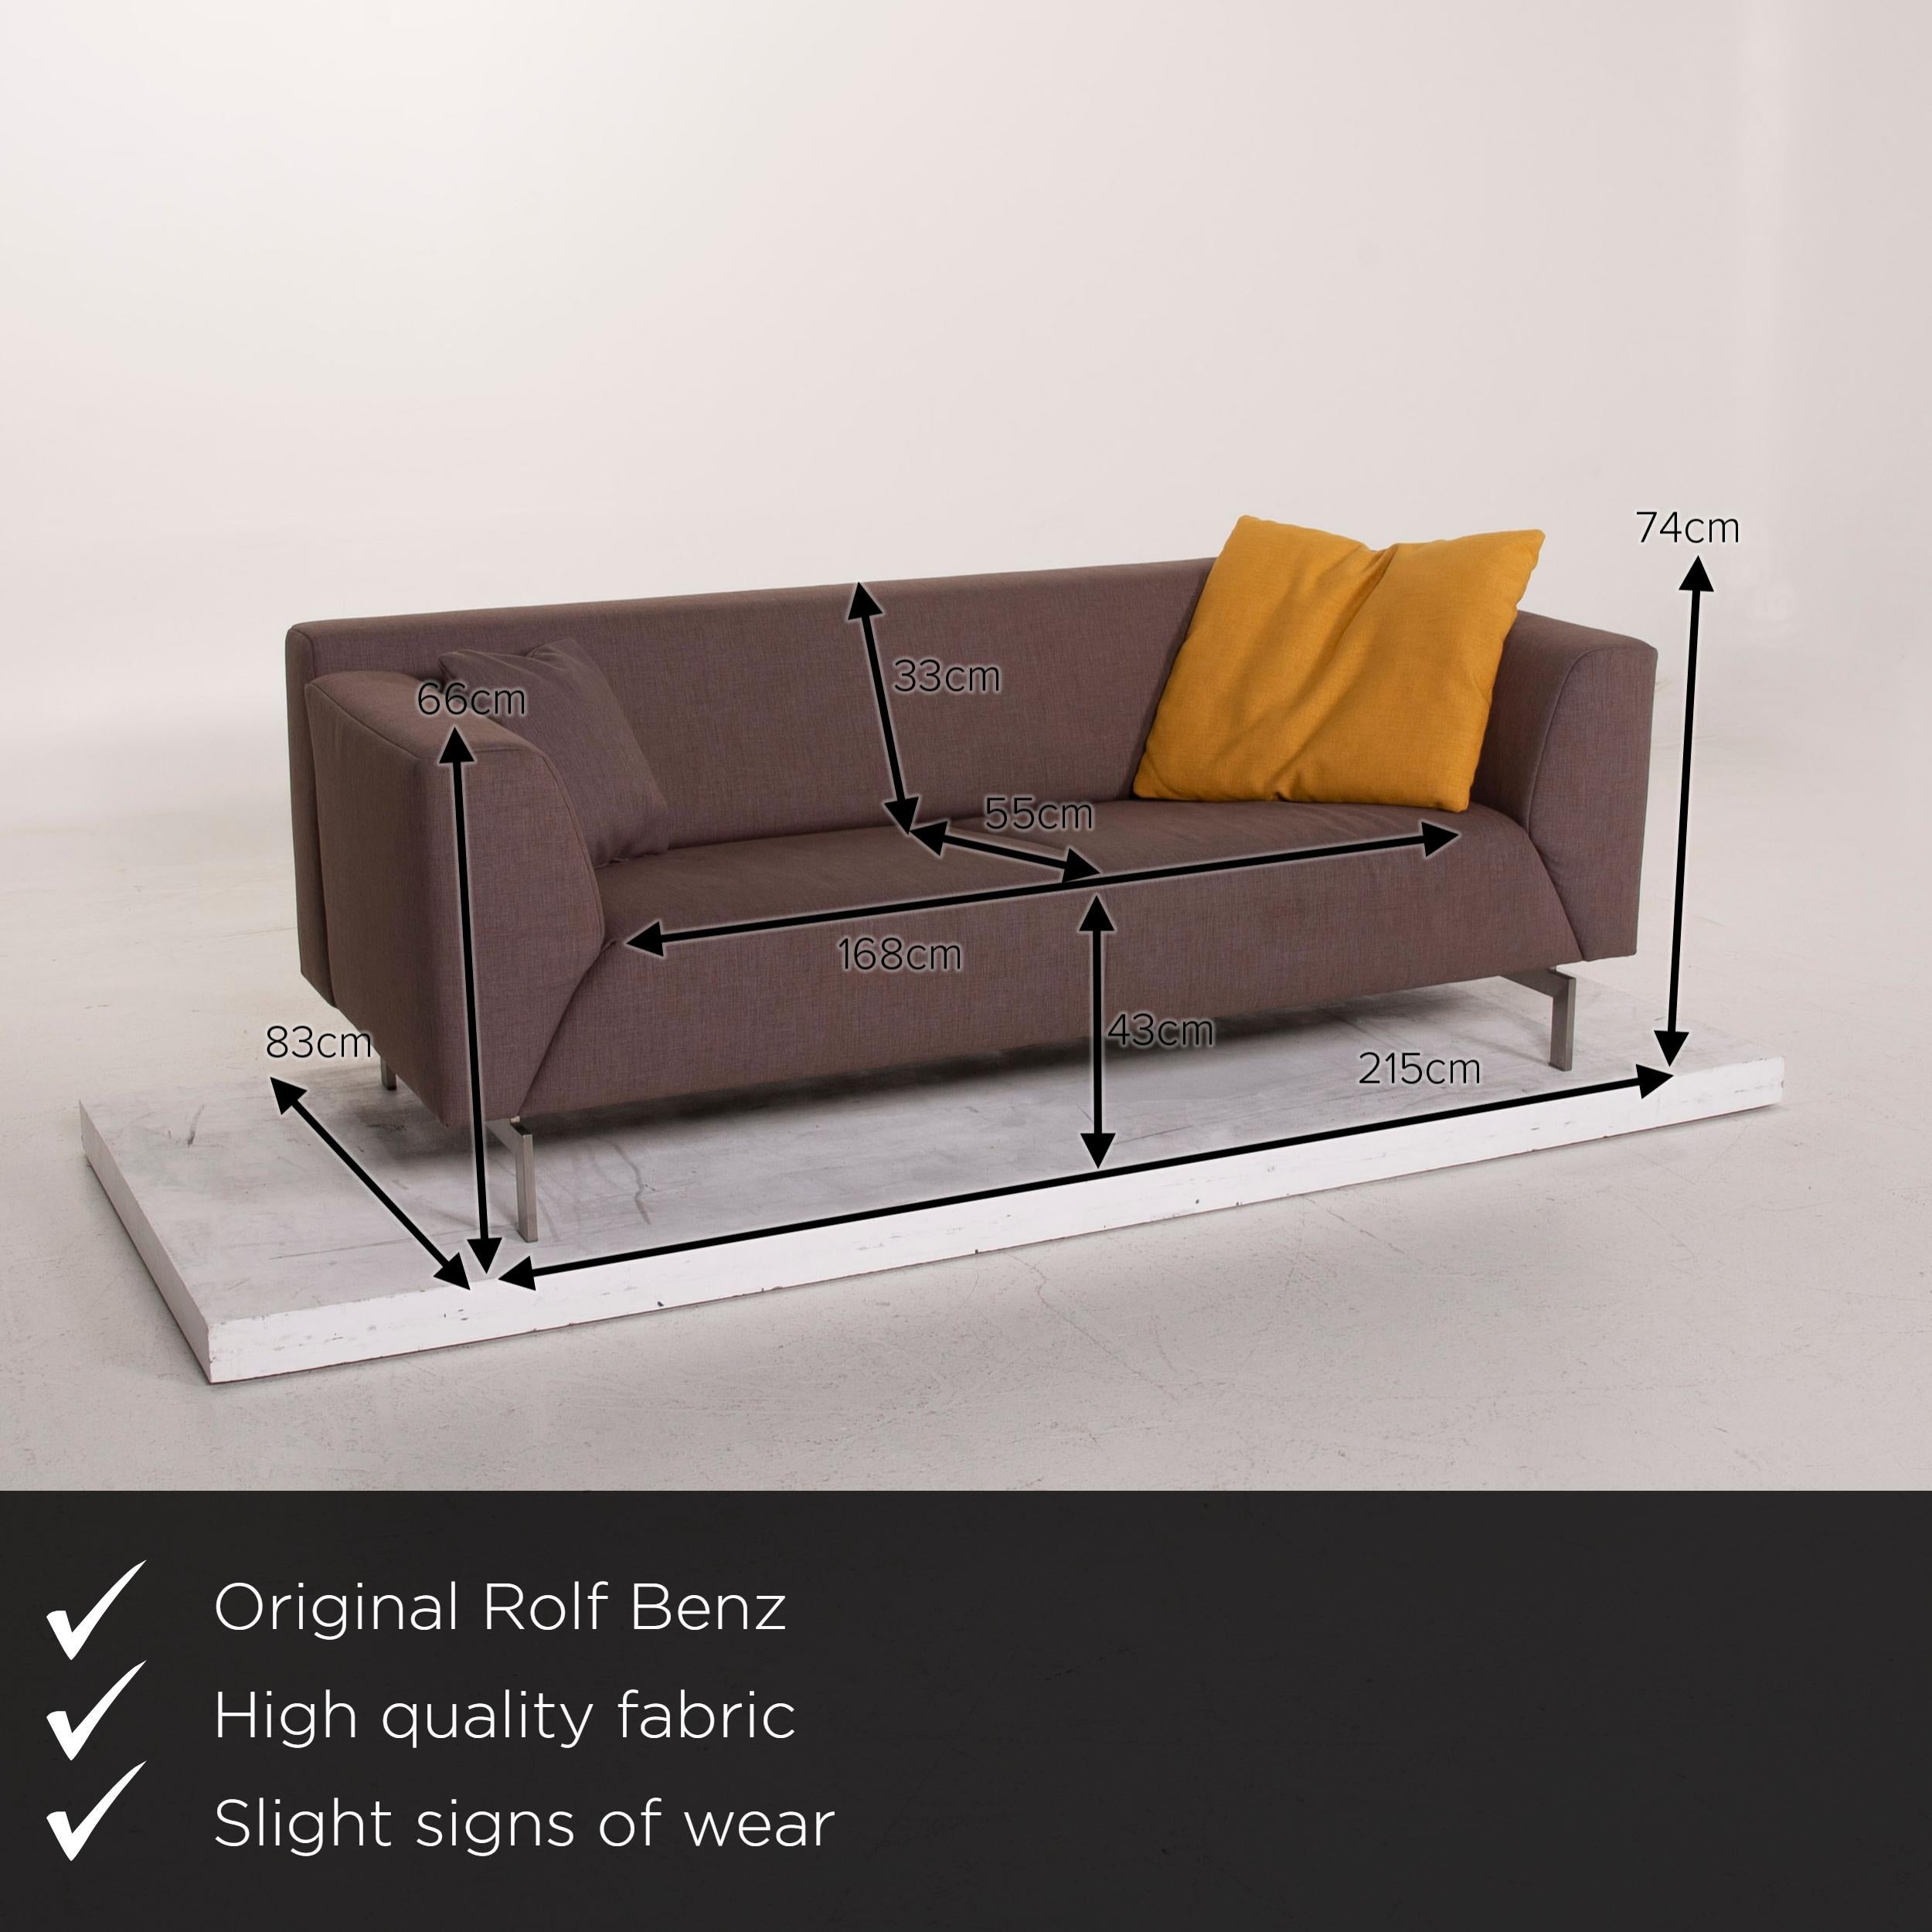 We present to you a Rolf Benz 318 Linea fabric sofa gray two-seat.


 Product measurements in centimeters:
 

Depth 83
Width 169
Height 74
Seat height 43
Rest height 86
Seat depth 55
Seat width 147
Back height 33.
 